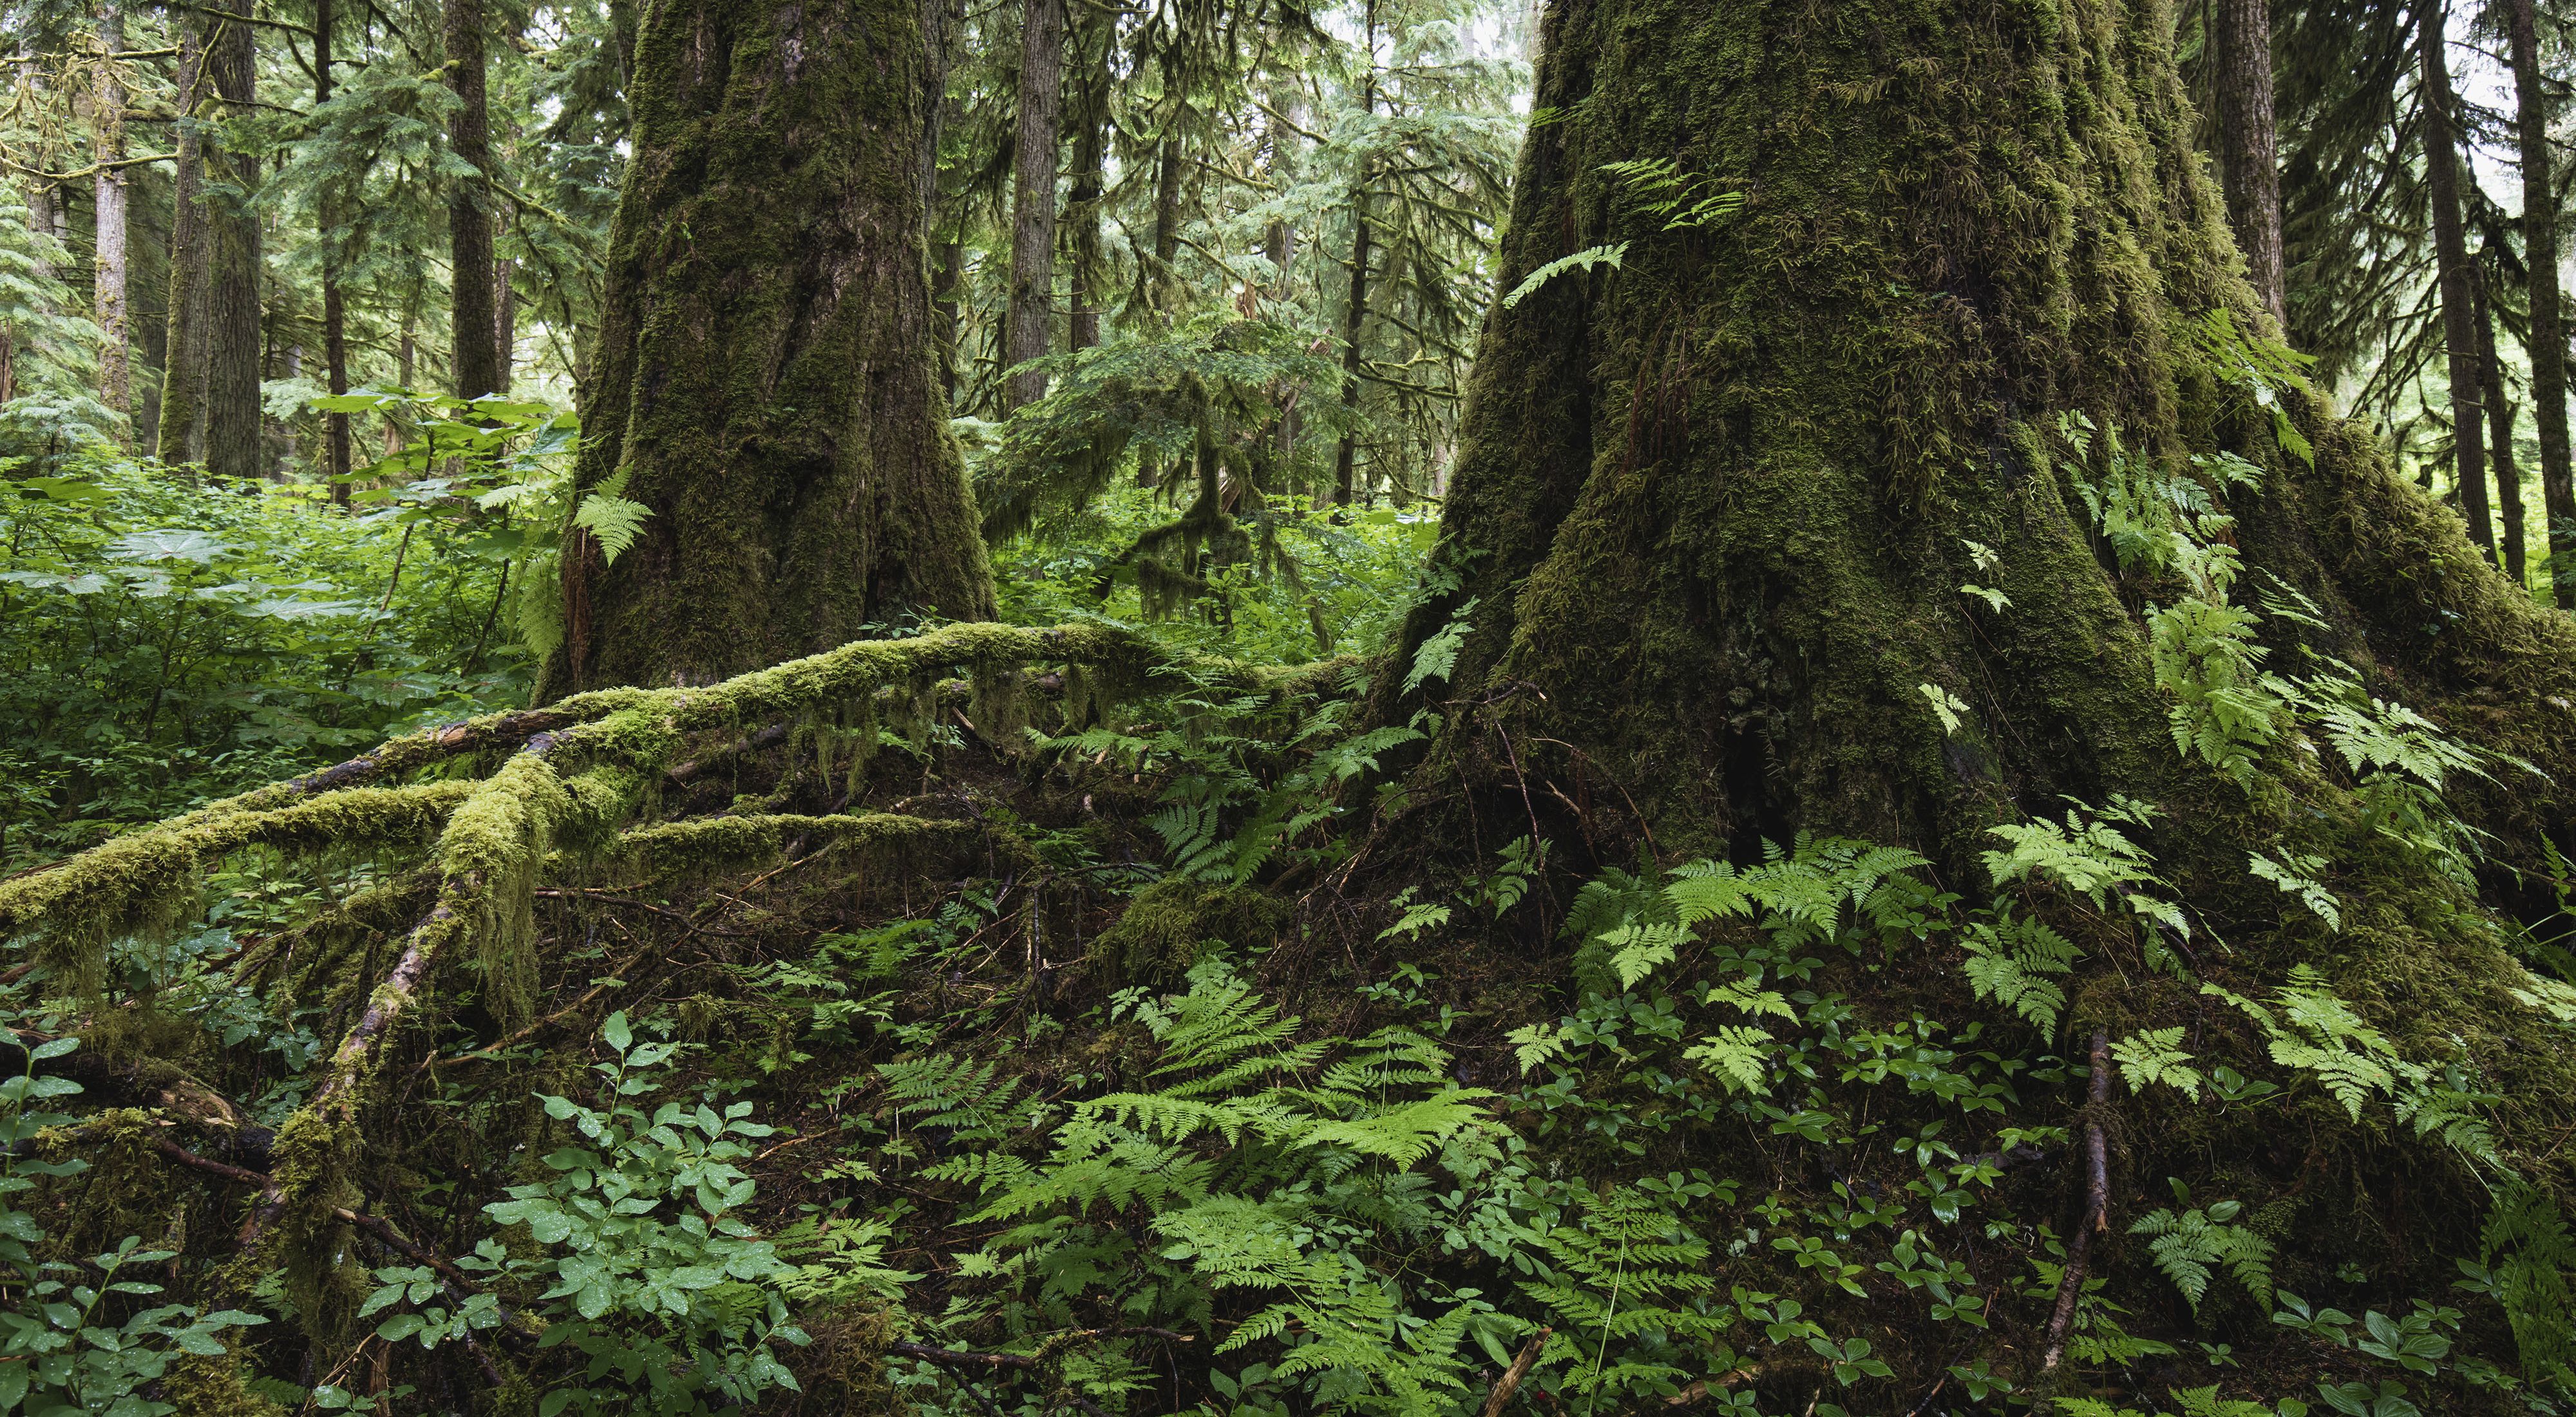 The bases of large, old growth trees on the lush green forest floor.